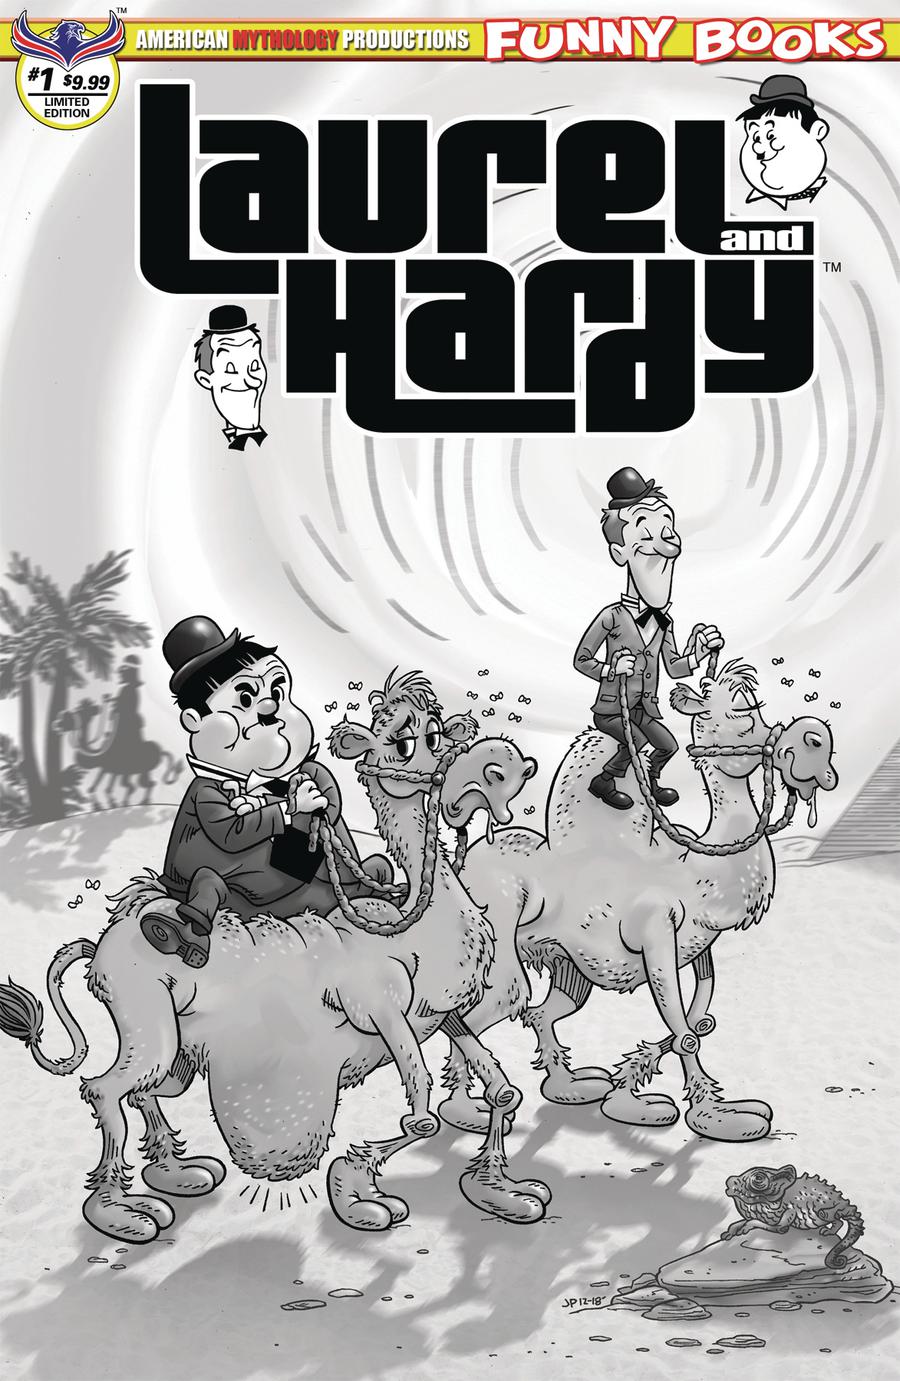 Laurel And Hardy Vol 2 #1 Cover B Variant Jorge Pacheco Limited Edition Black & White Cover